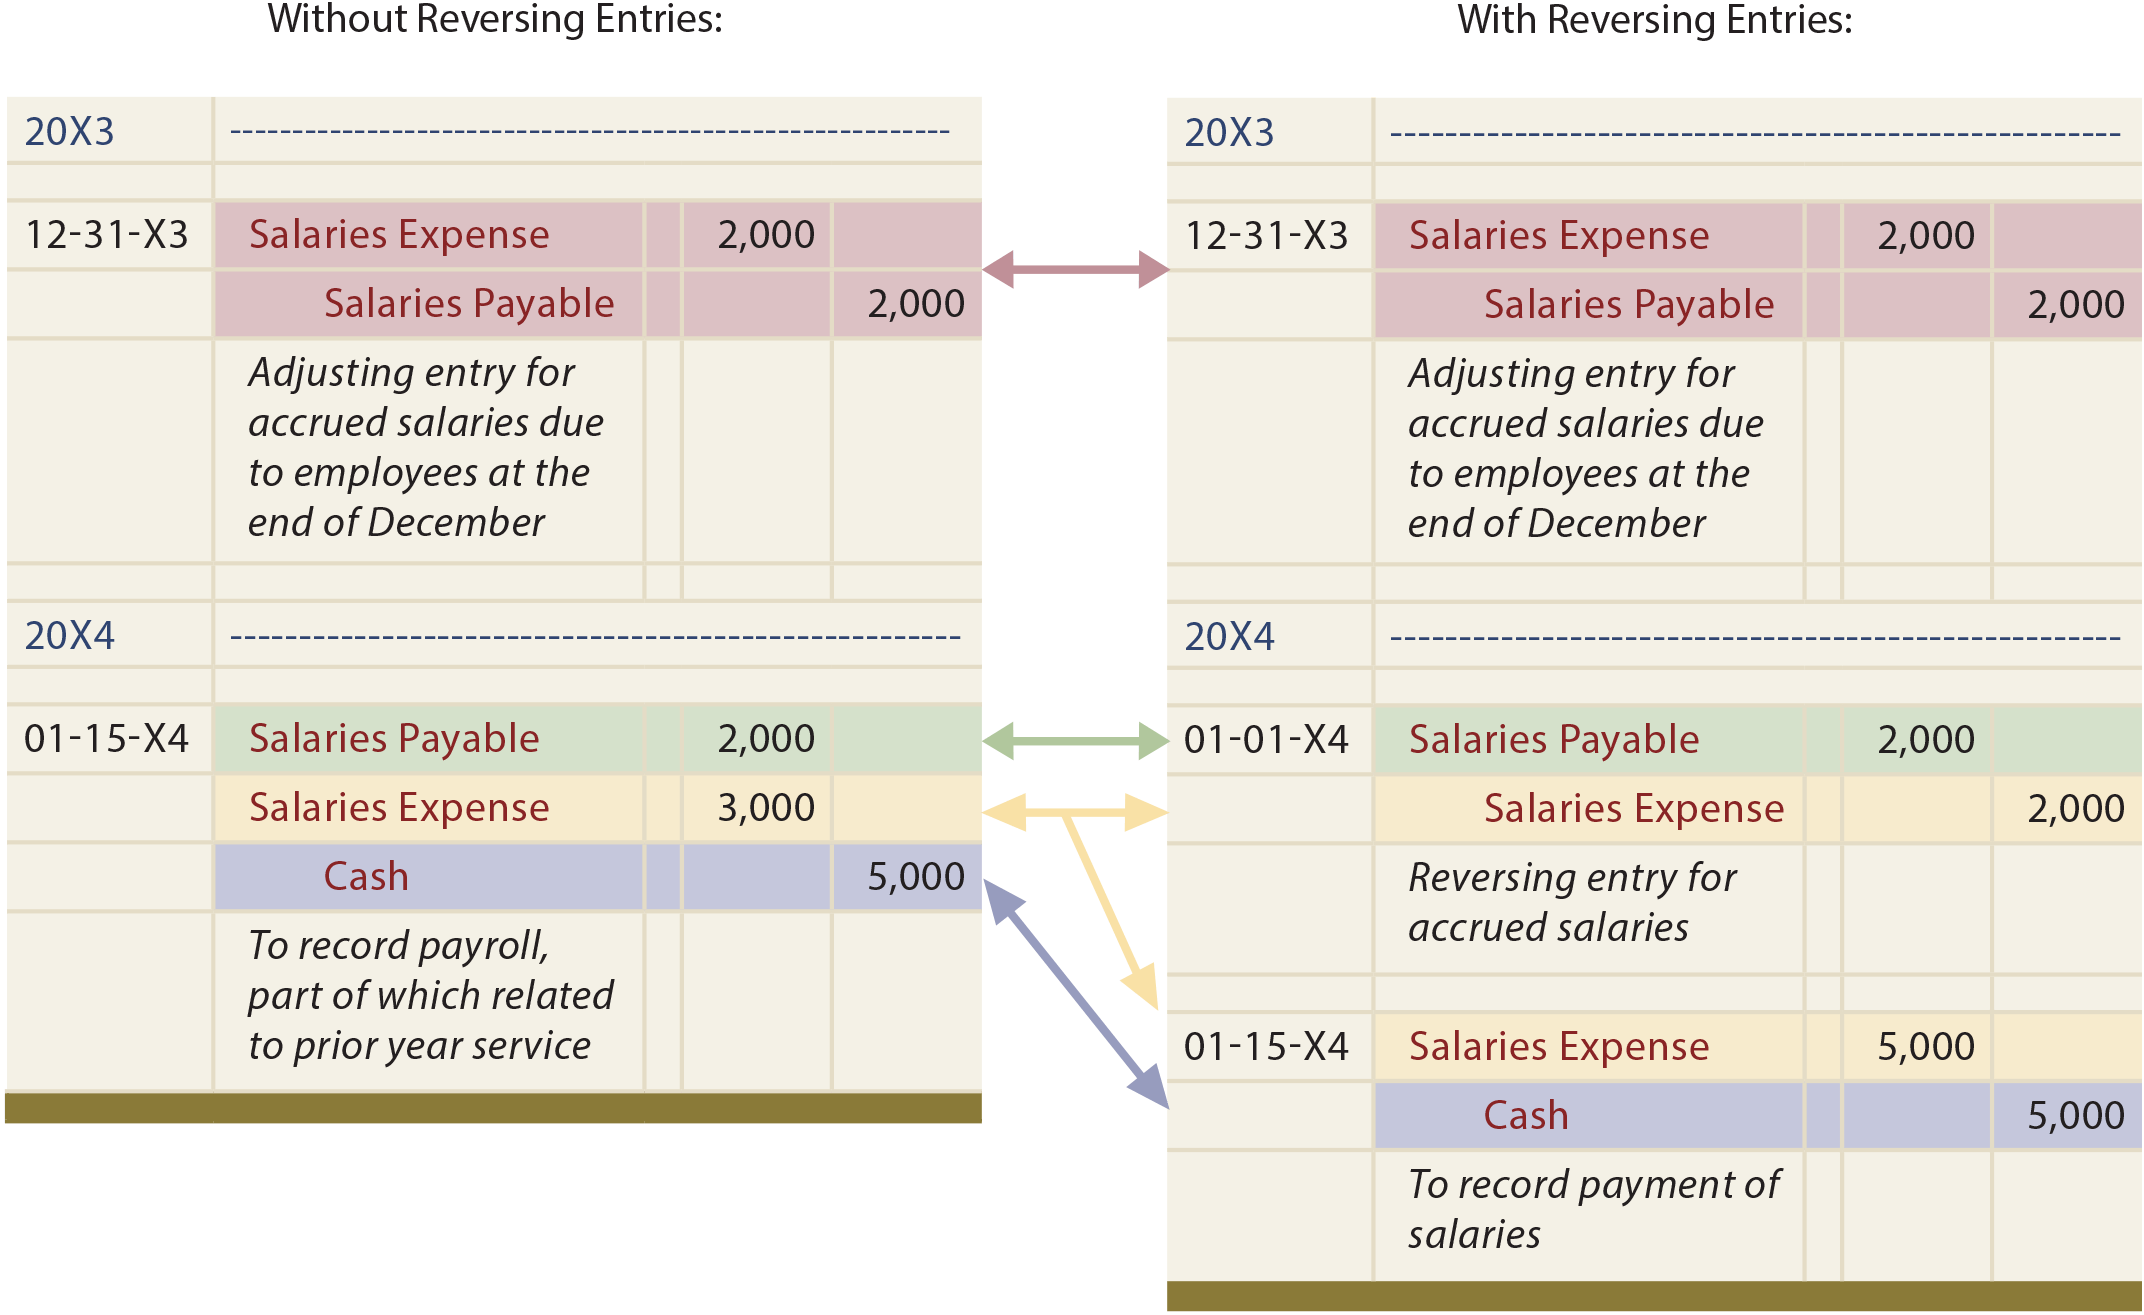 Illustration With and Without Reversing Entries